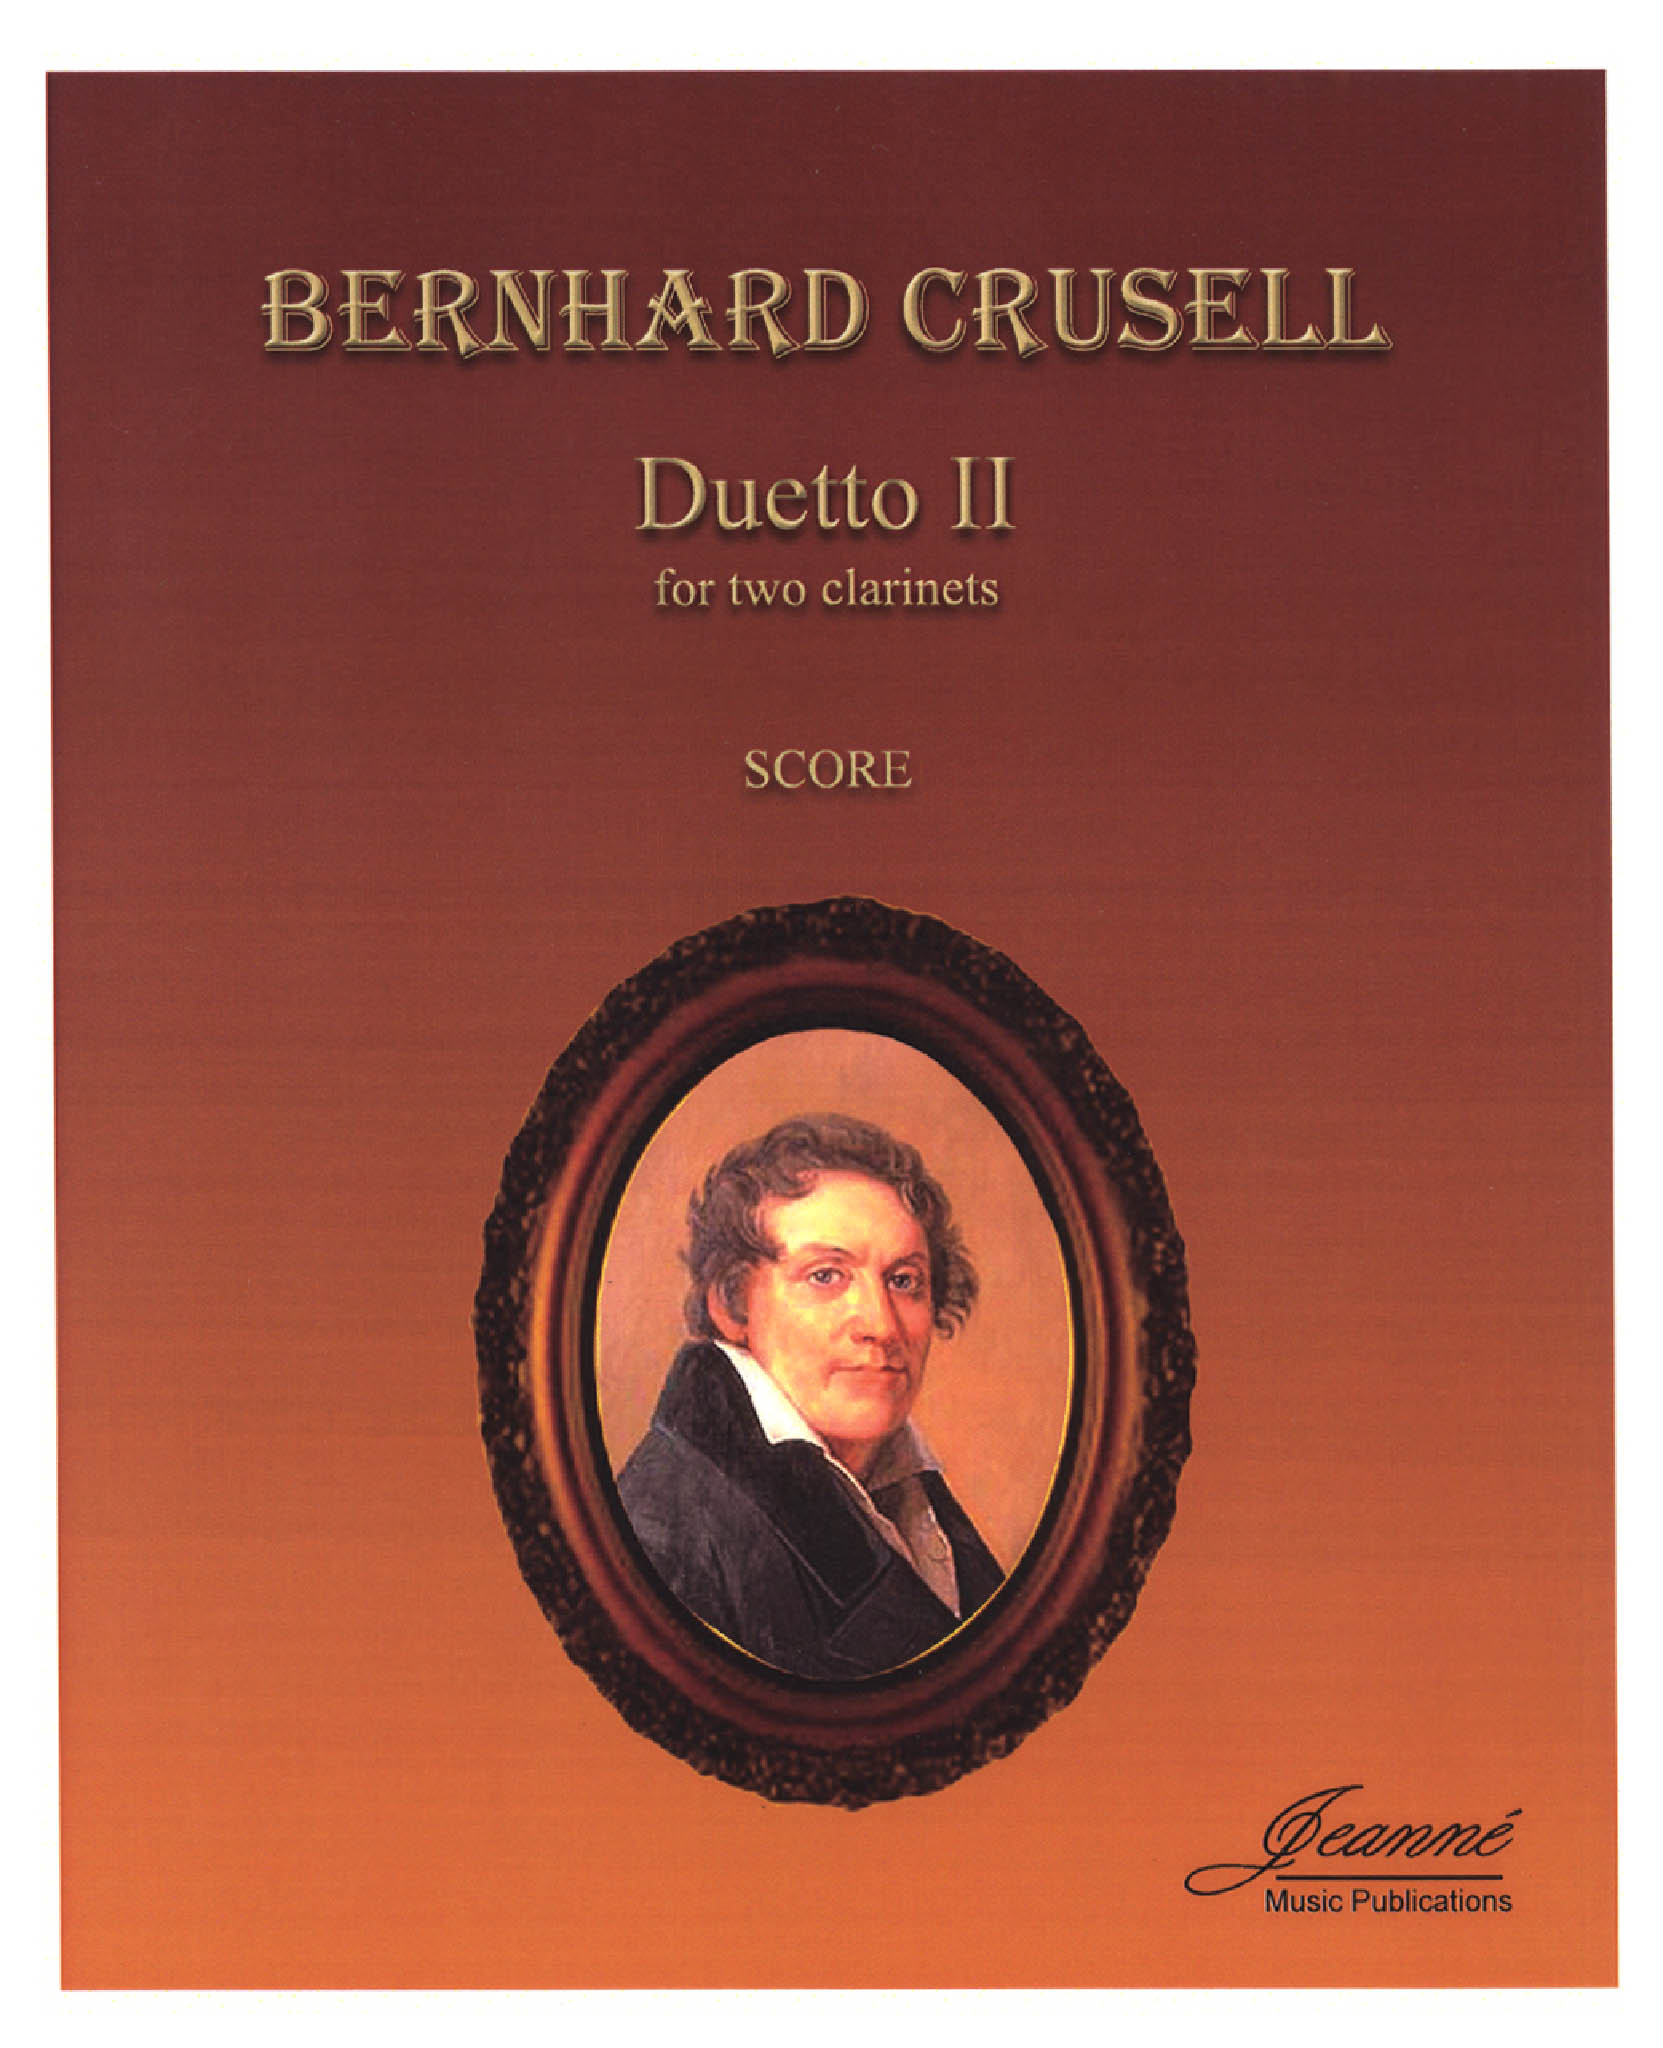 Crusell Clarinet Duet No. 3 in C Major score cover